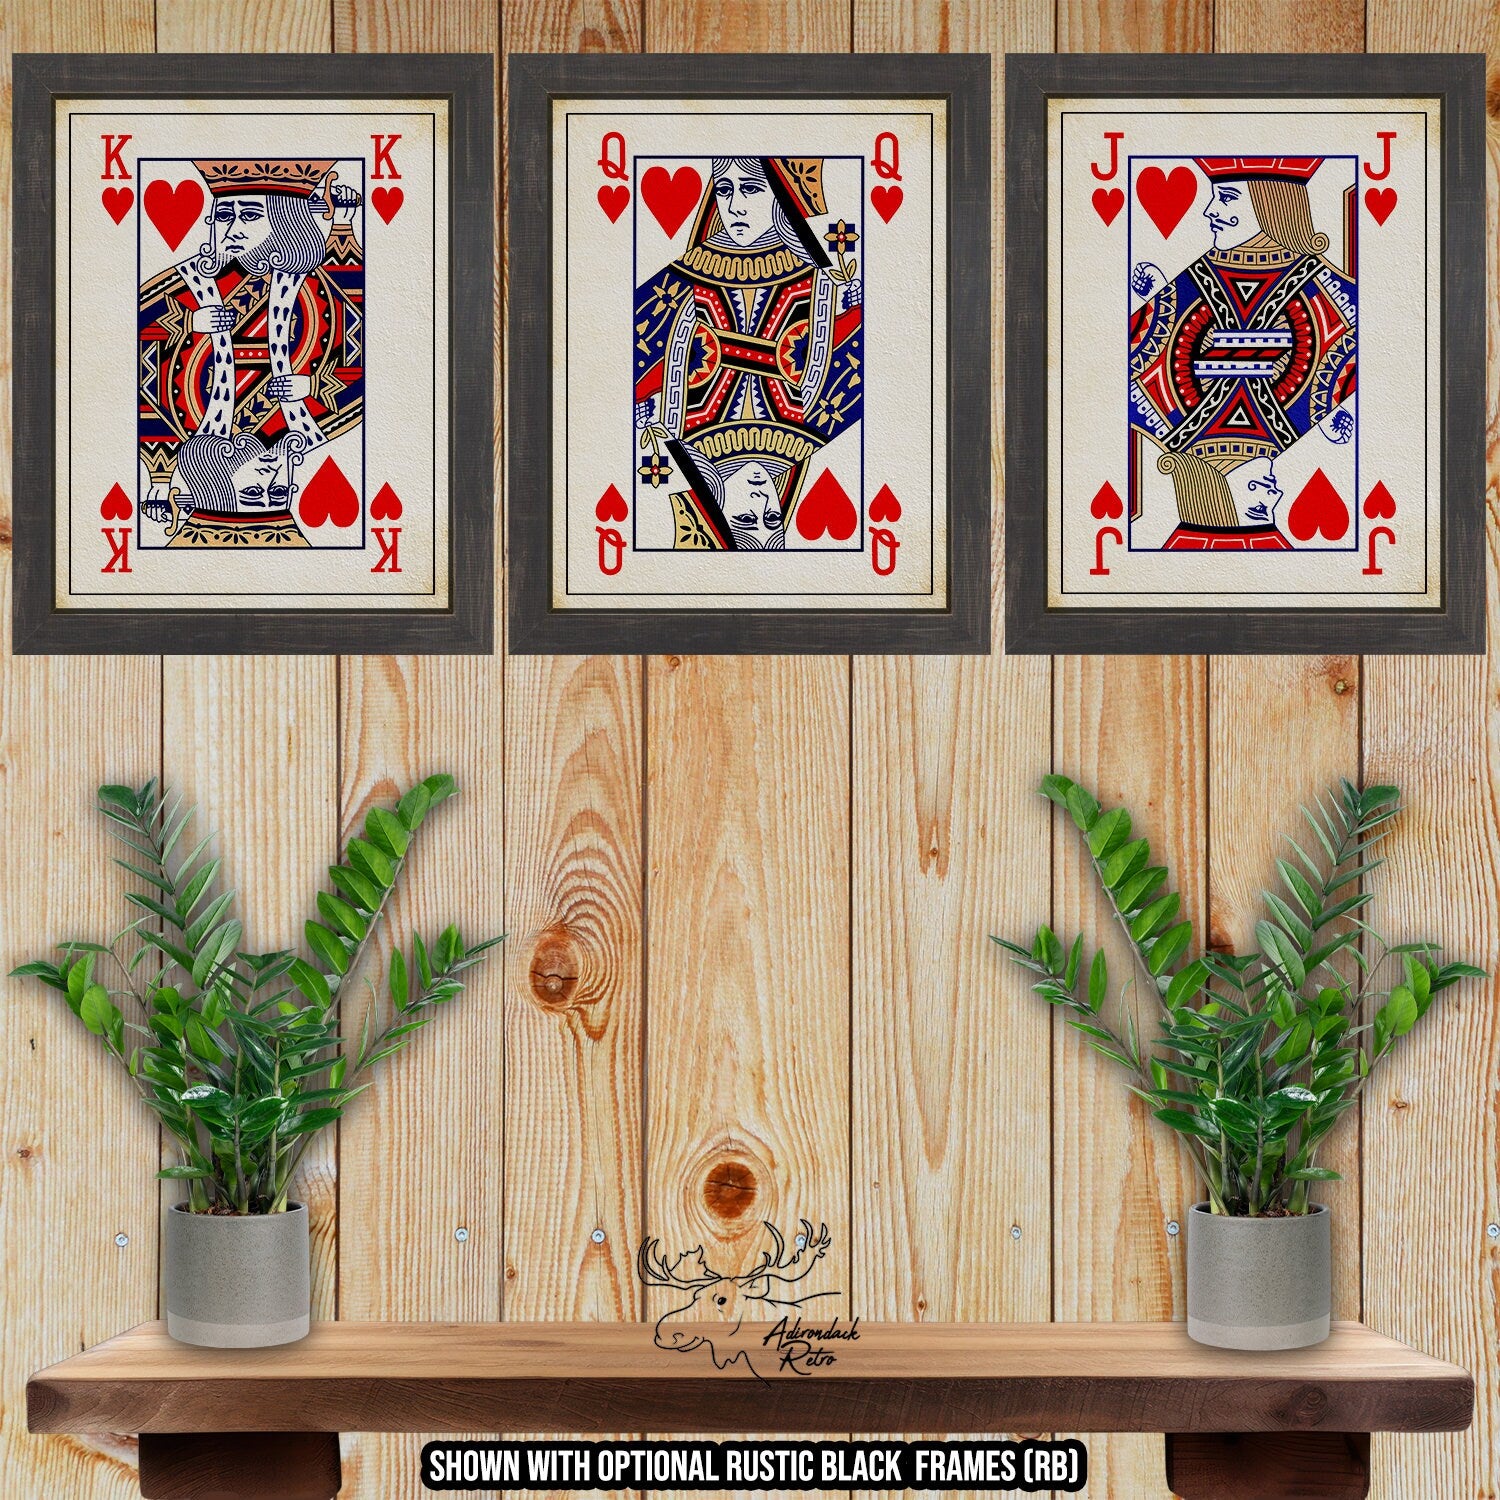 King Queen Jack of Hearts Poker Print Set - Hearts Court Cards at Adirondack Retro